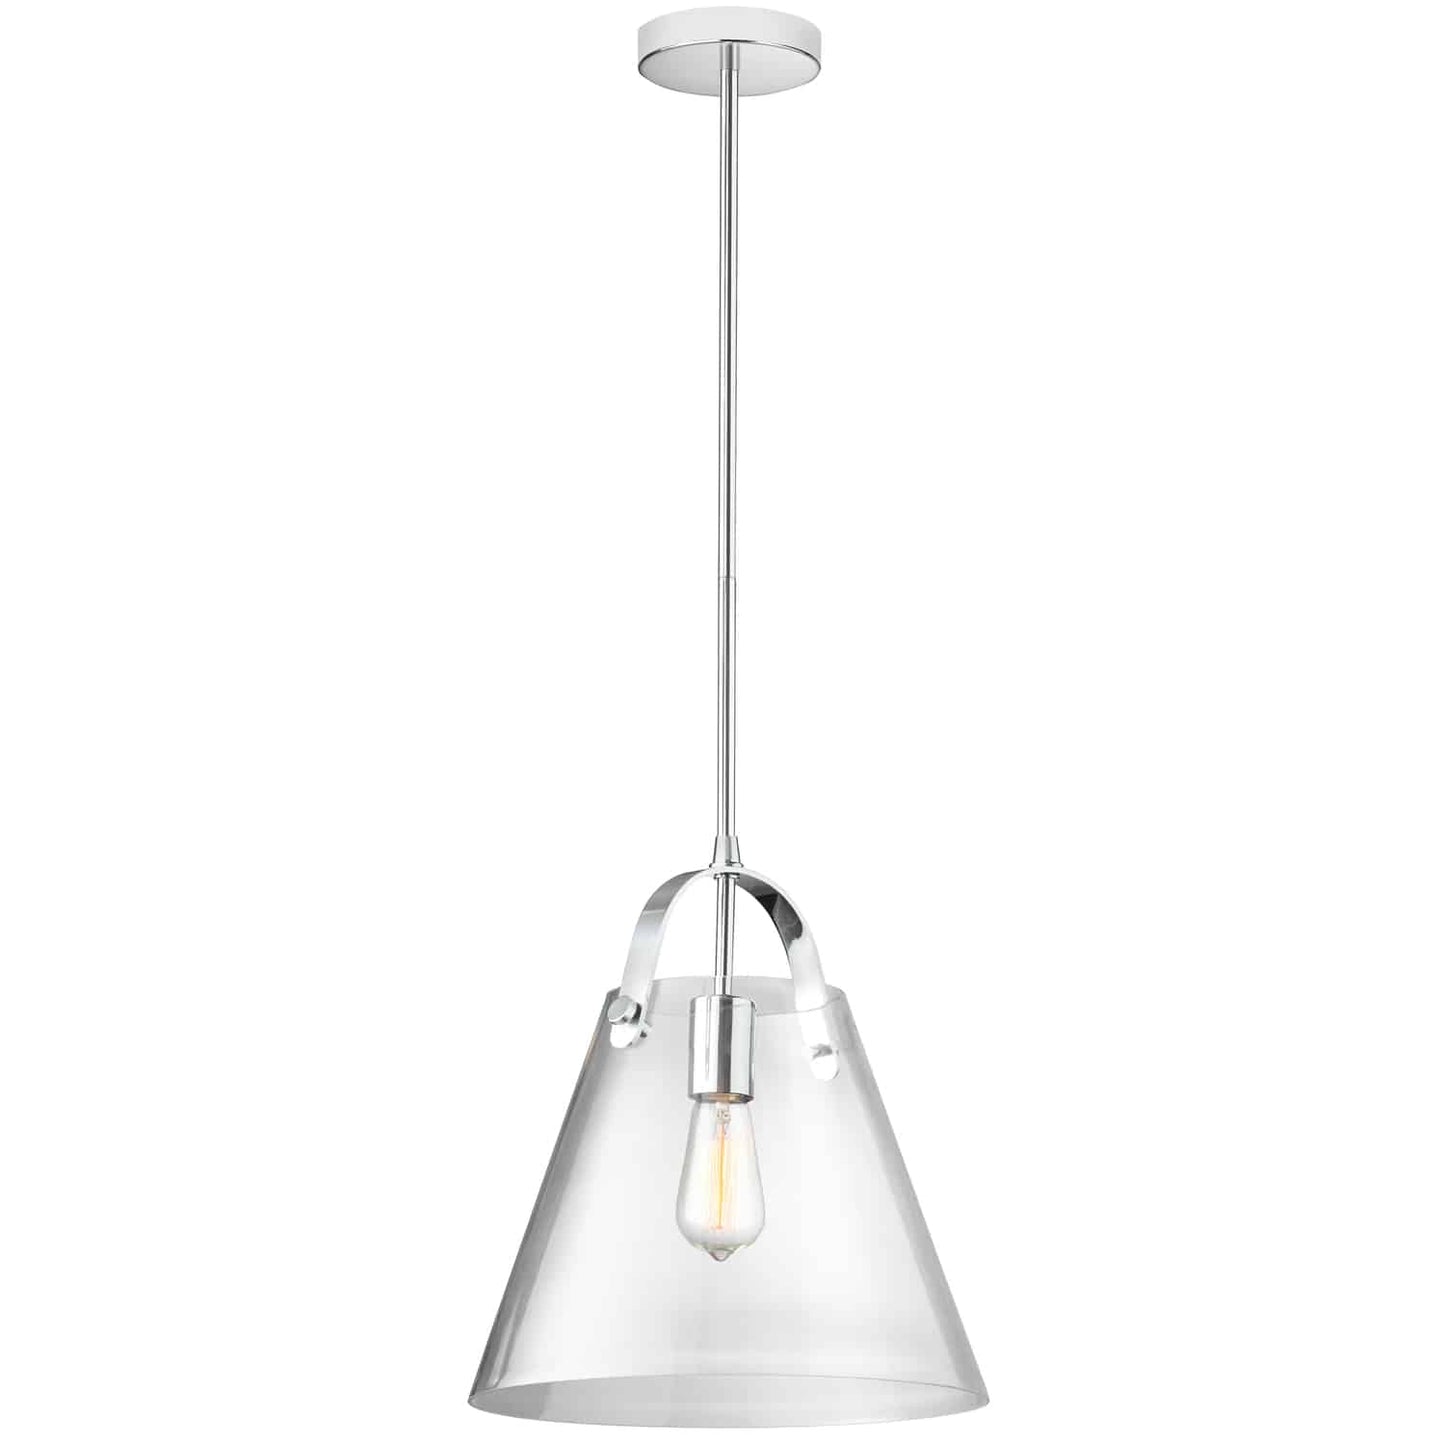 Dainolite 871P-PC 1 Light Incandescent Pendant Polished Chrome Finish with Clear Glass